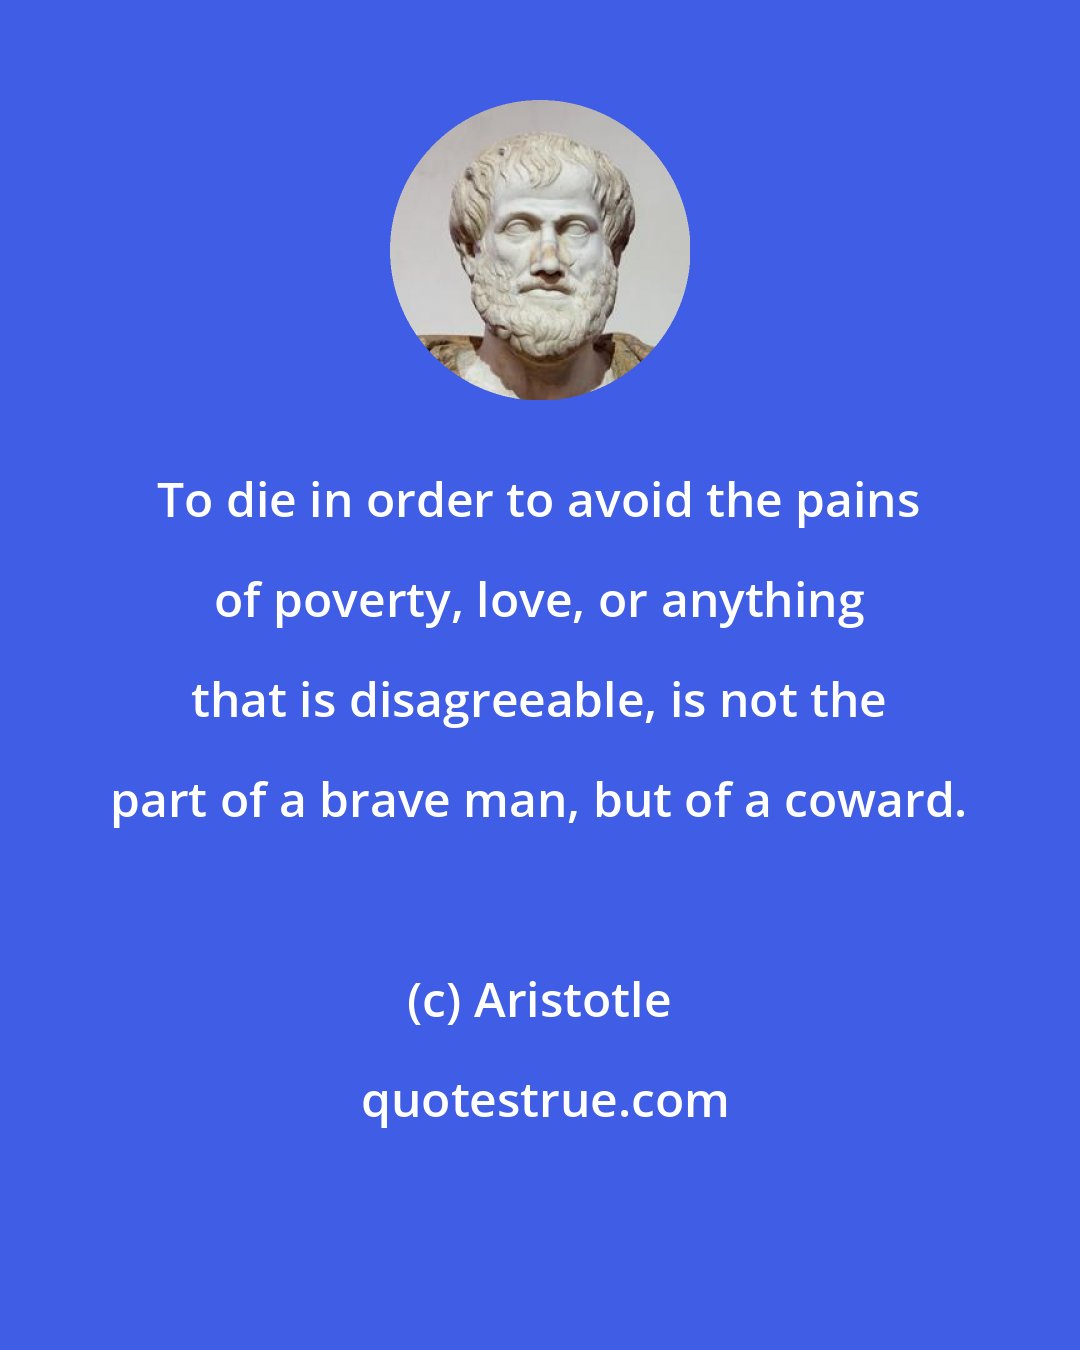 Aristotle: To die in order to avoid the pains of poverty, love, or anything that is disagreeable, is not the part of a brave man, but of a coward.